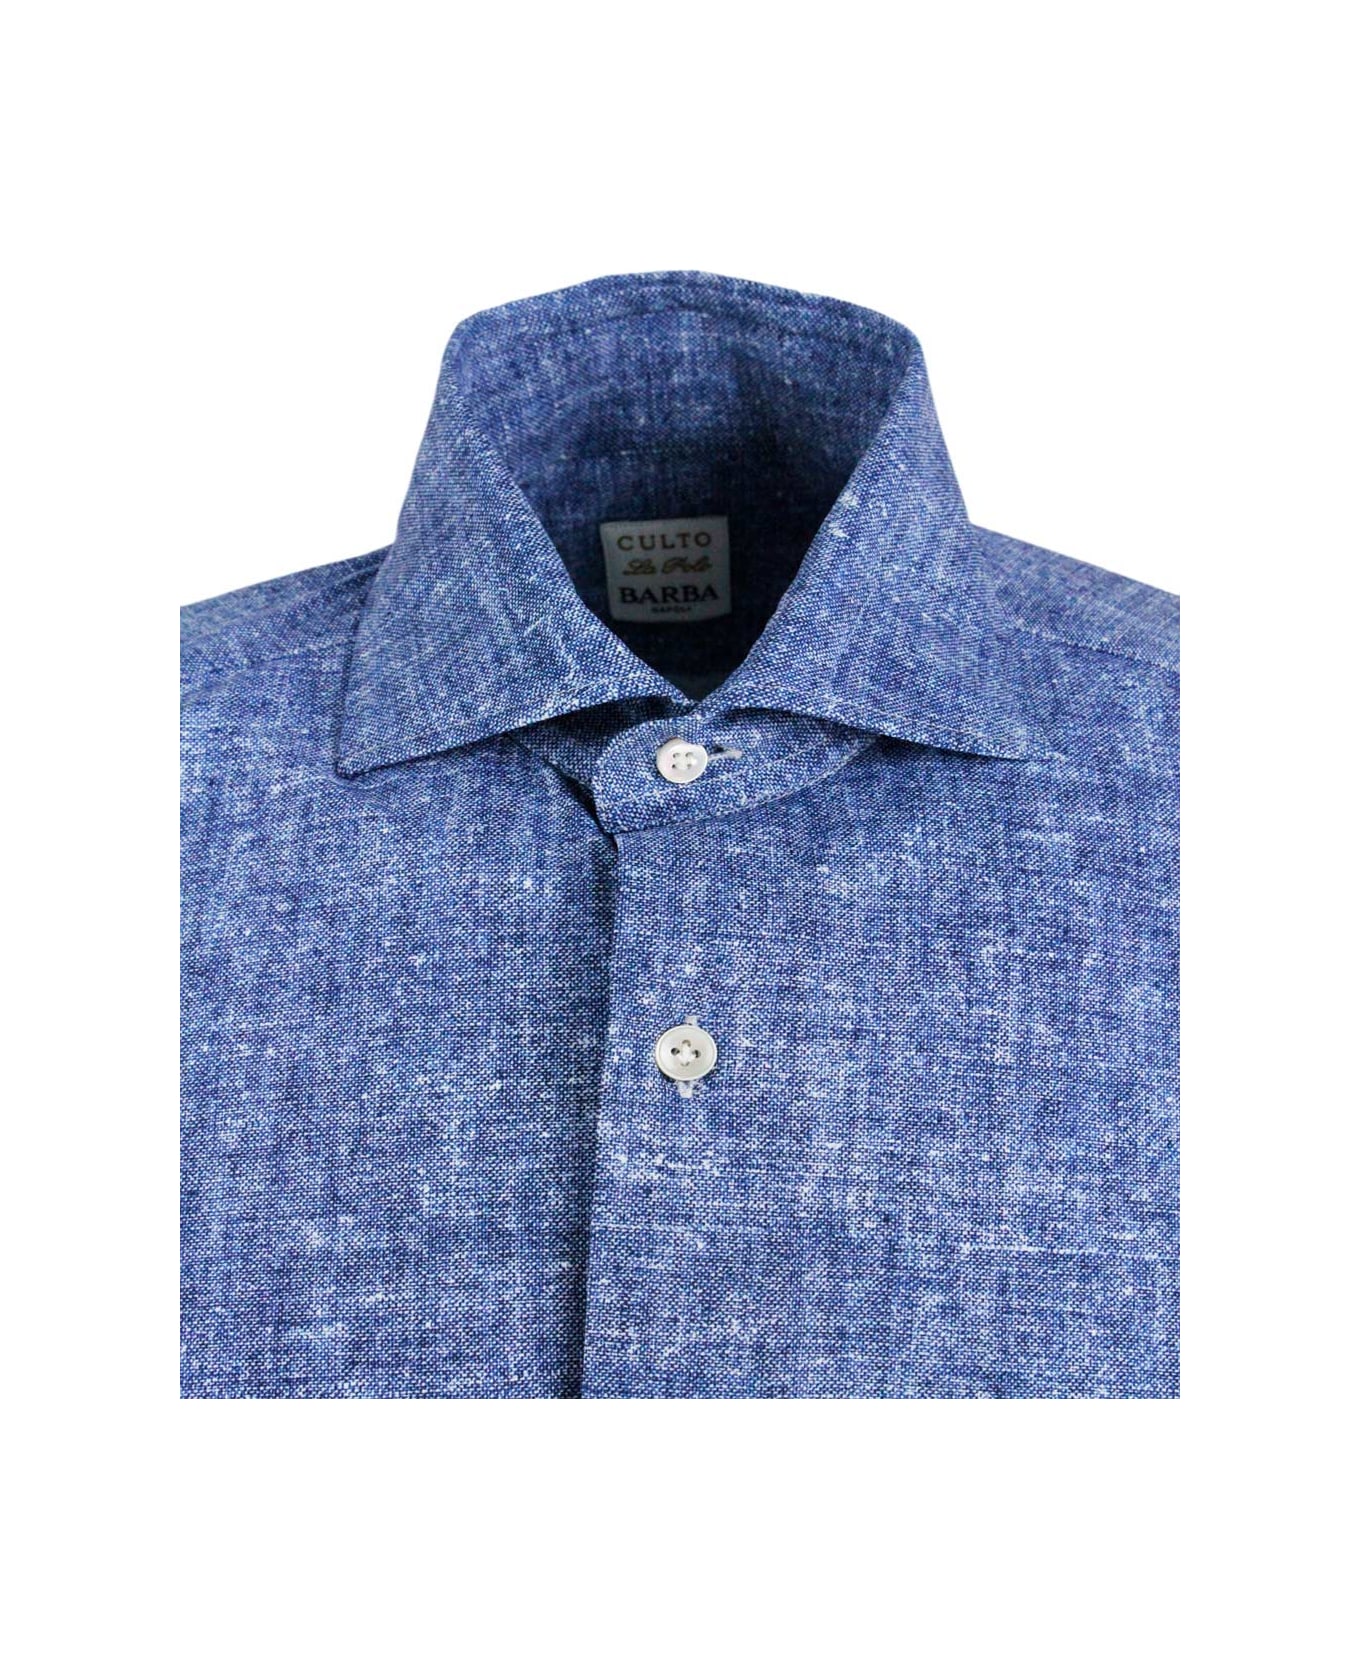 Barba Napoli Cult Shirt In Super Stretch In Denim Melange Color With Mother-of-pearl Buttons And Italian Collar - Denim シャツ